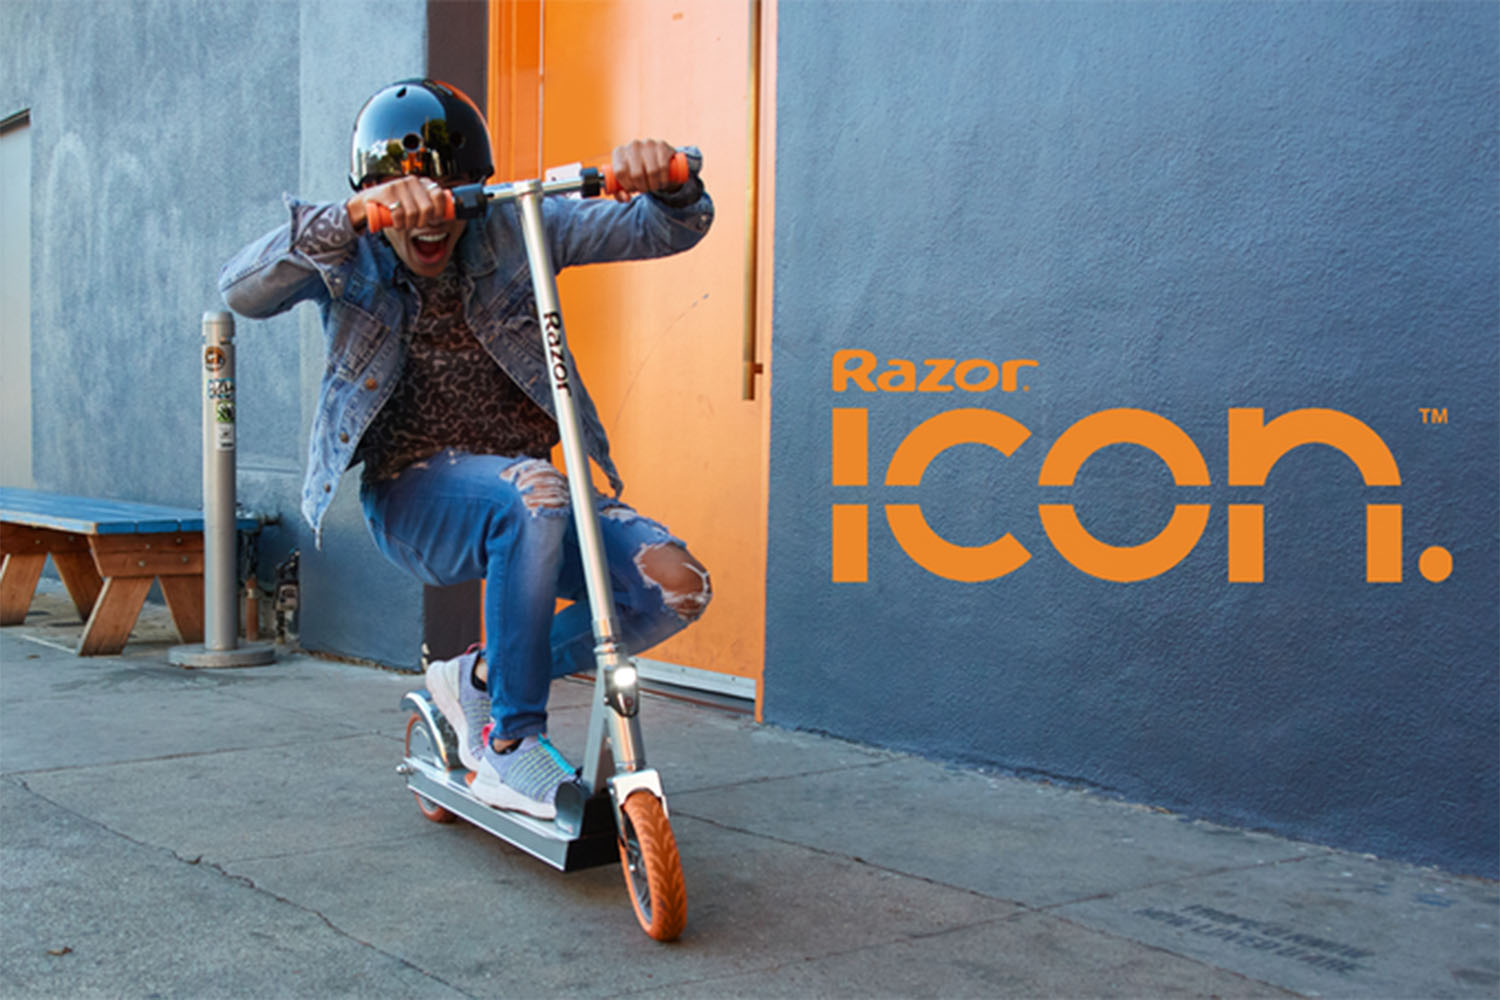 a model on a razor scooter